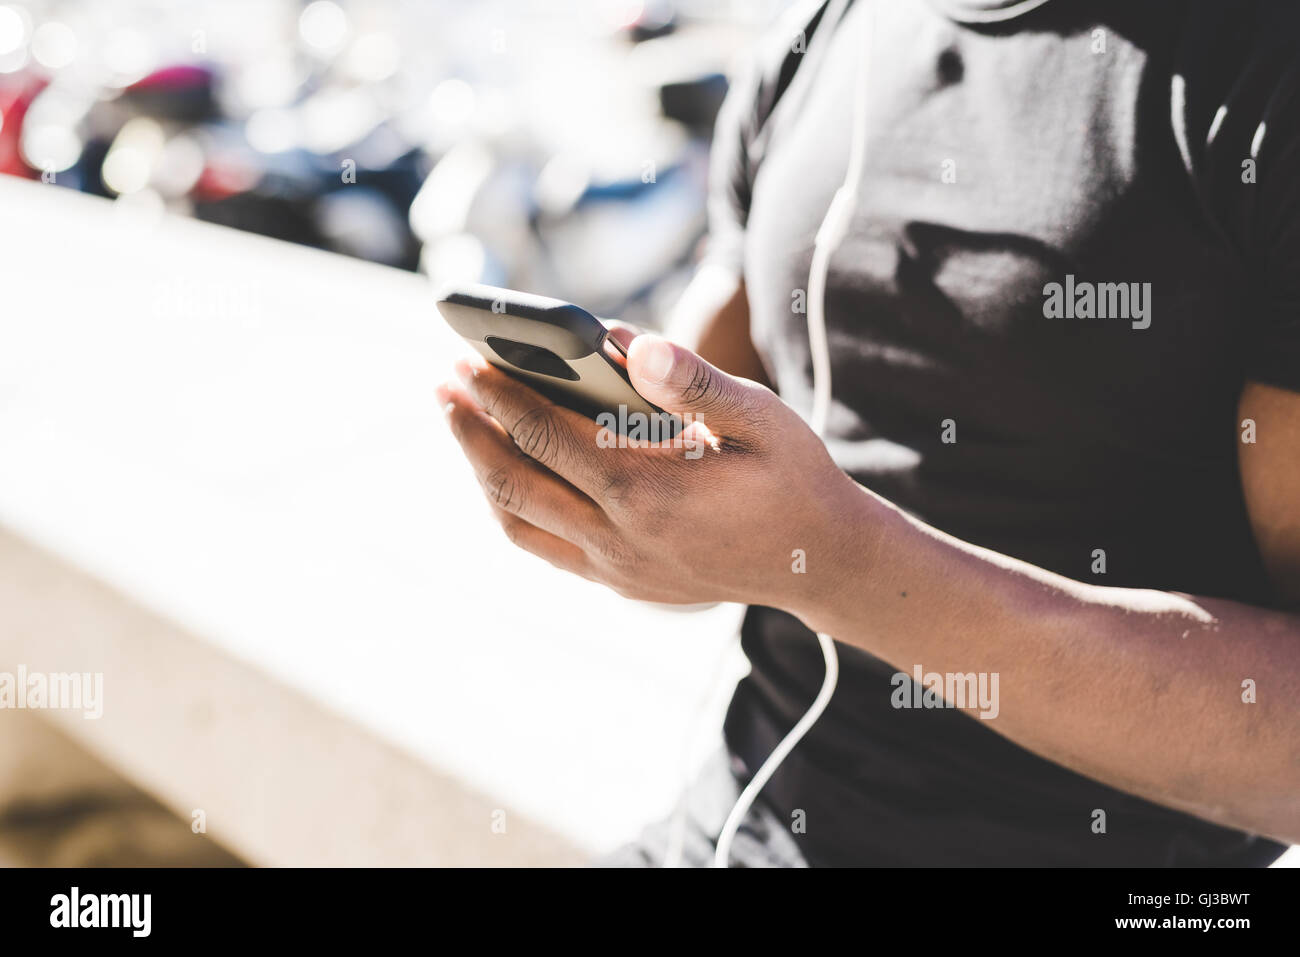 Young man outdoors, holding smartphone, mid section Stock Photo